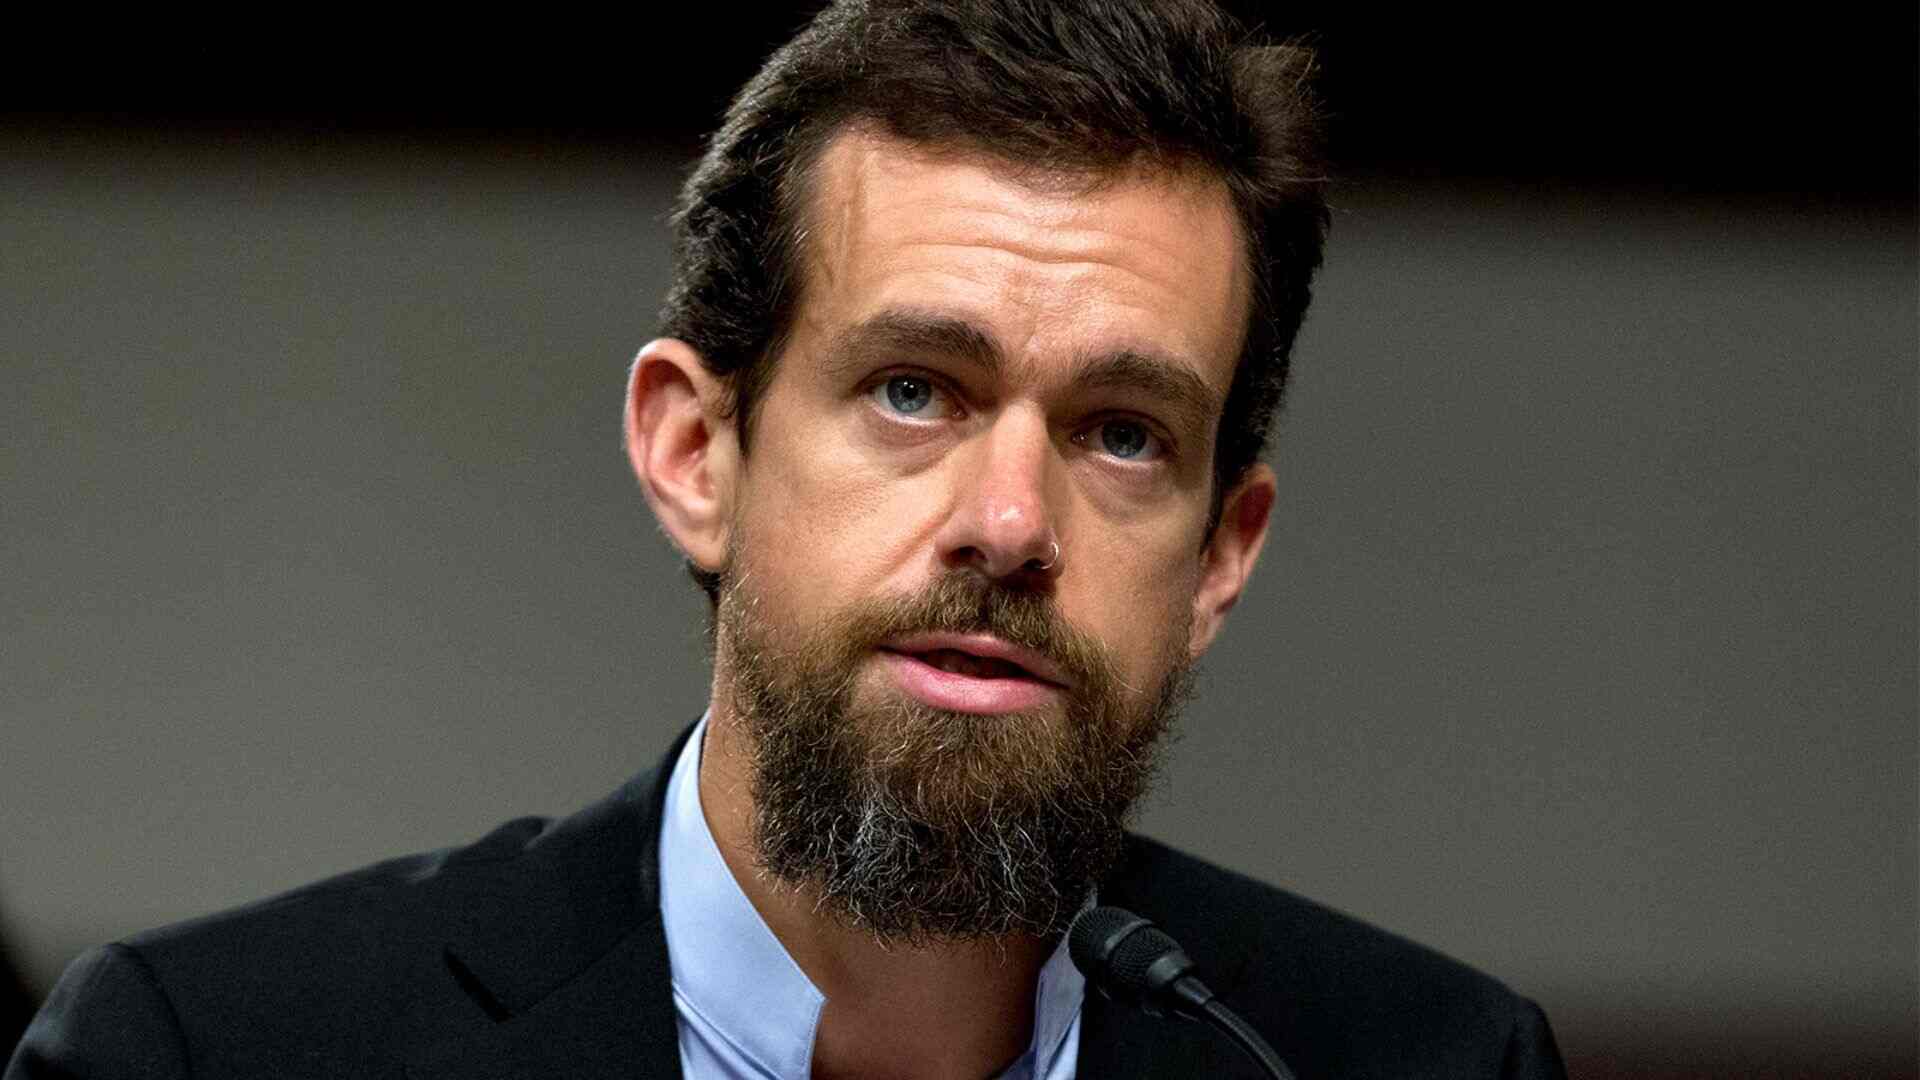 Who Is Jack Dorsey? Why Is He Being Criticized as ‘Jew Hater’?